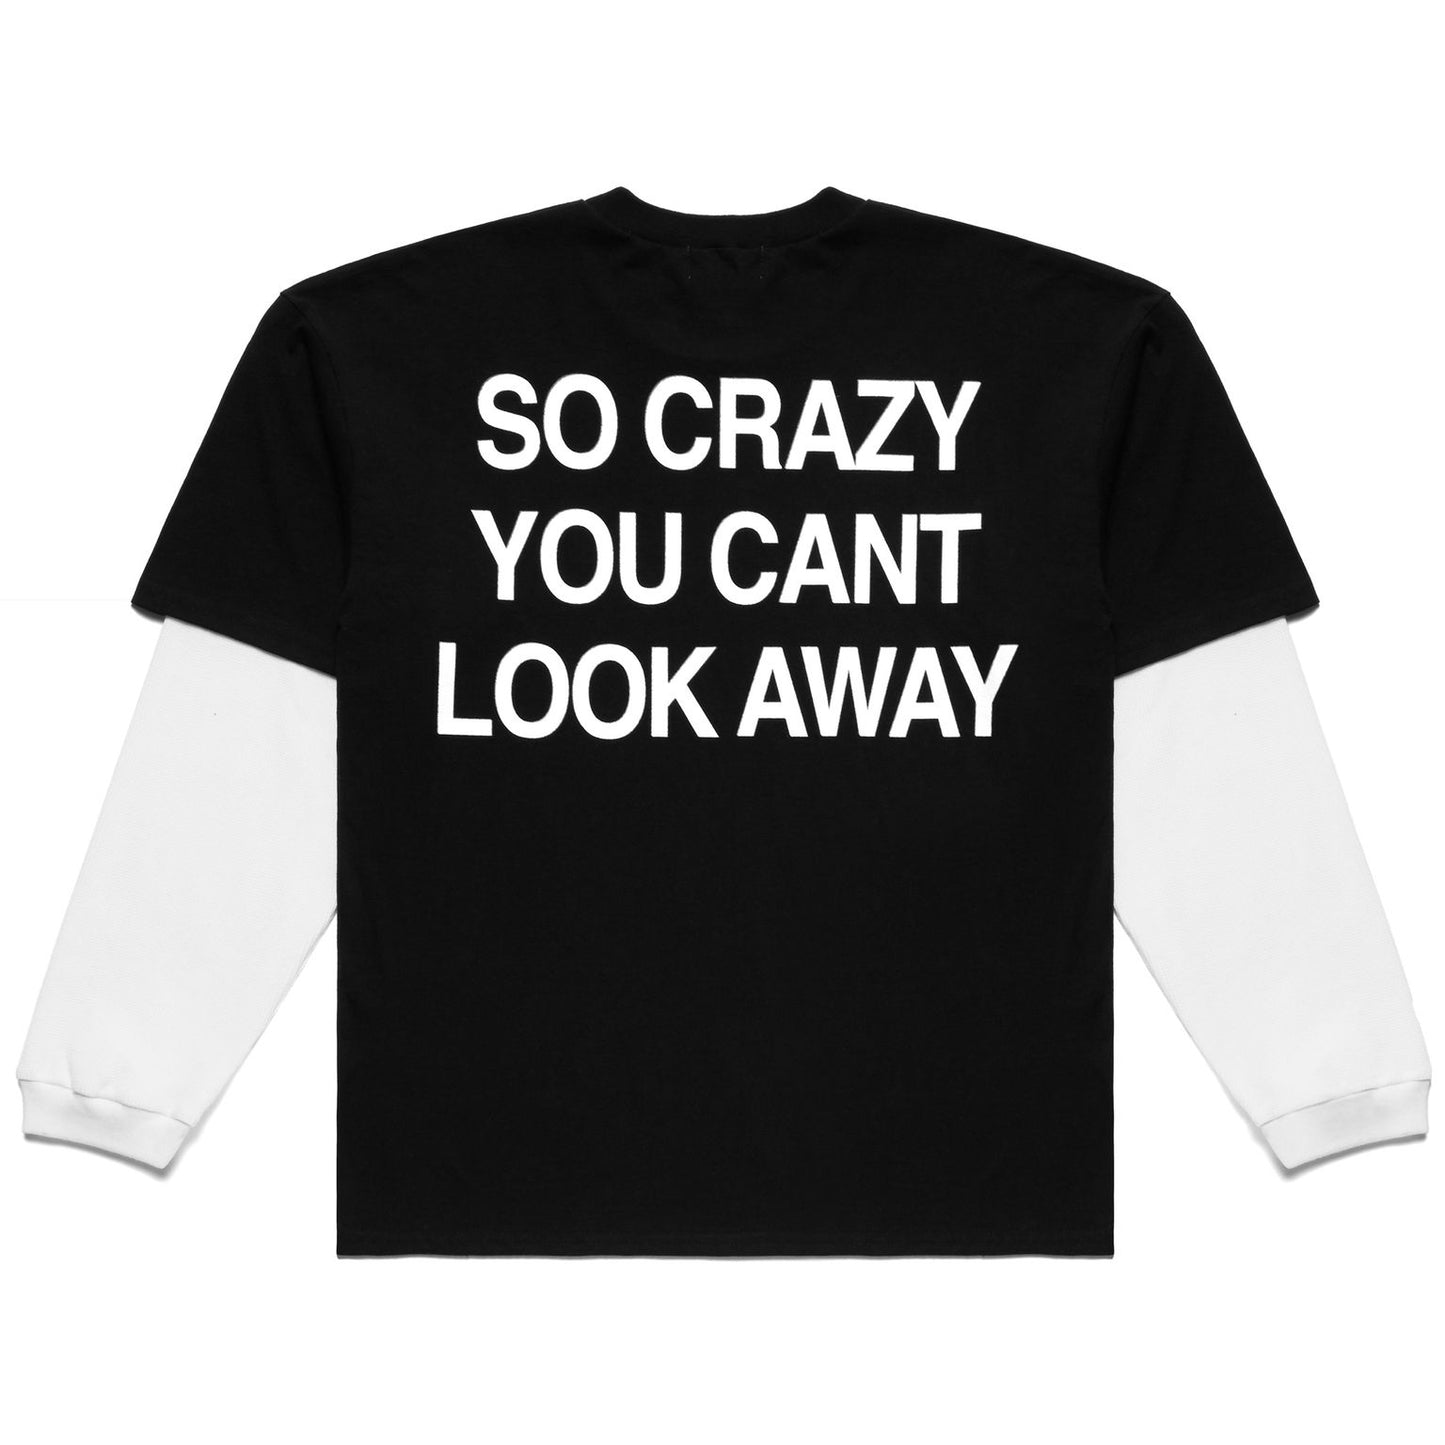 CAN'T LOOK AWAY DOUBLE LAYERED T-SHIRT by MENACE